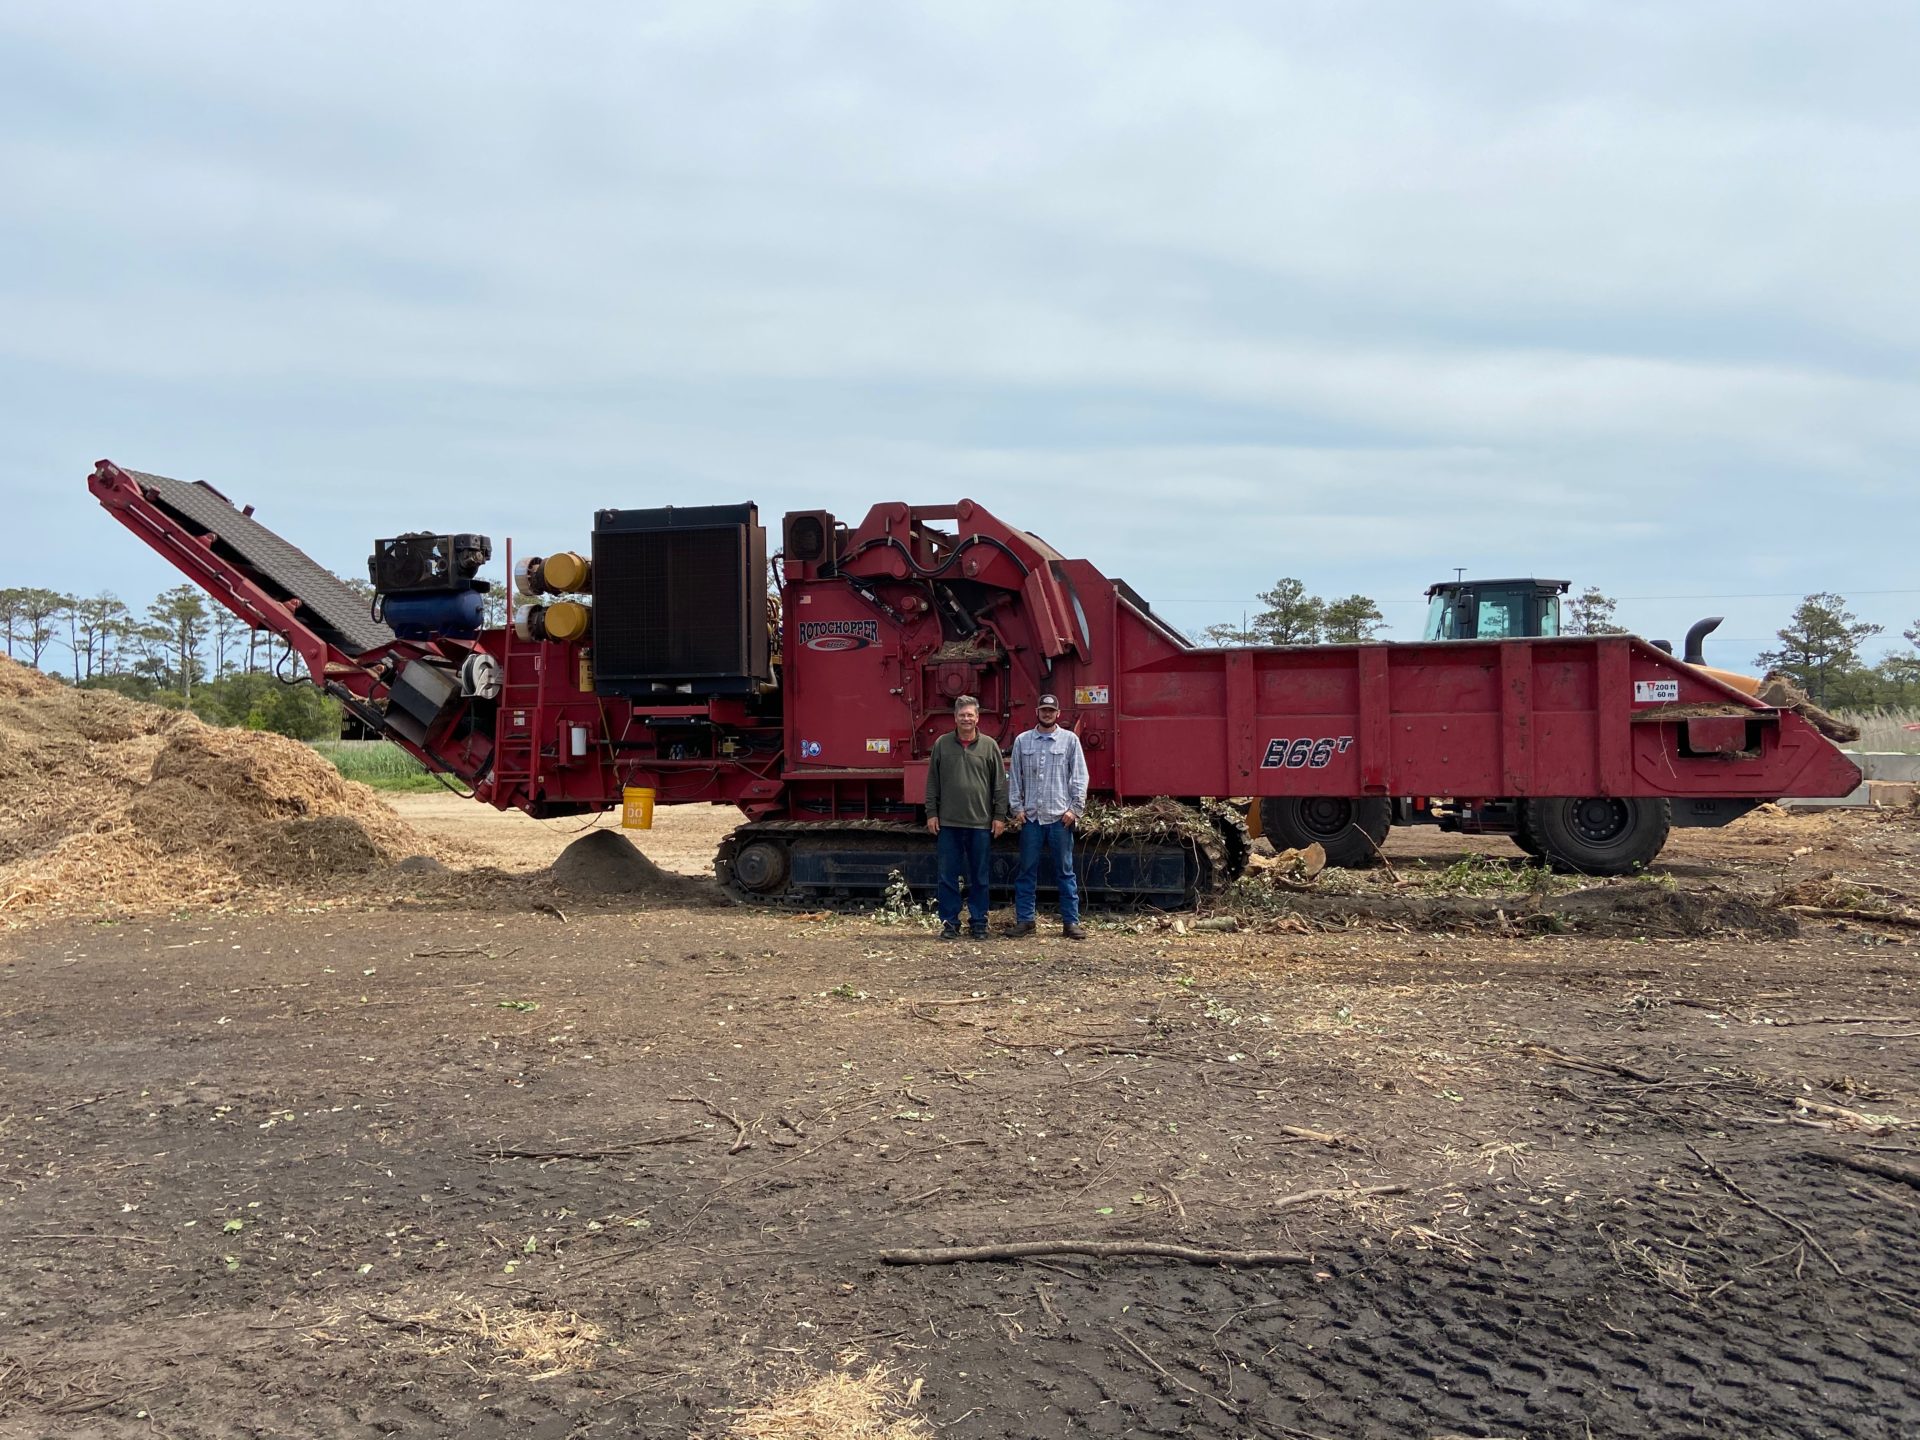 Two men standing in front of a large, red, tracked Rotochopper B-66T mulch-grinding machine